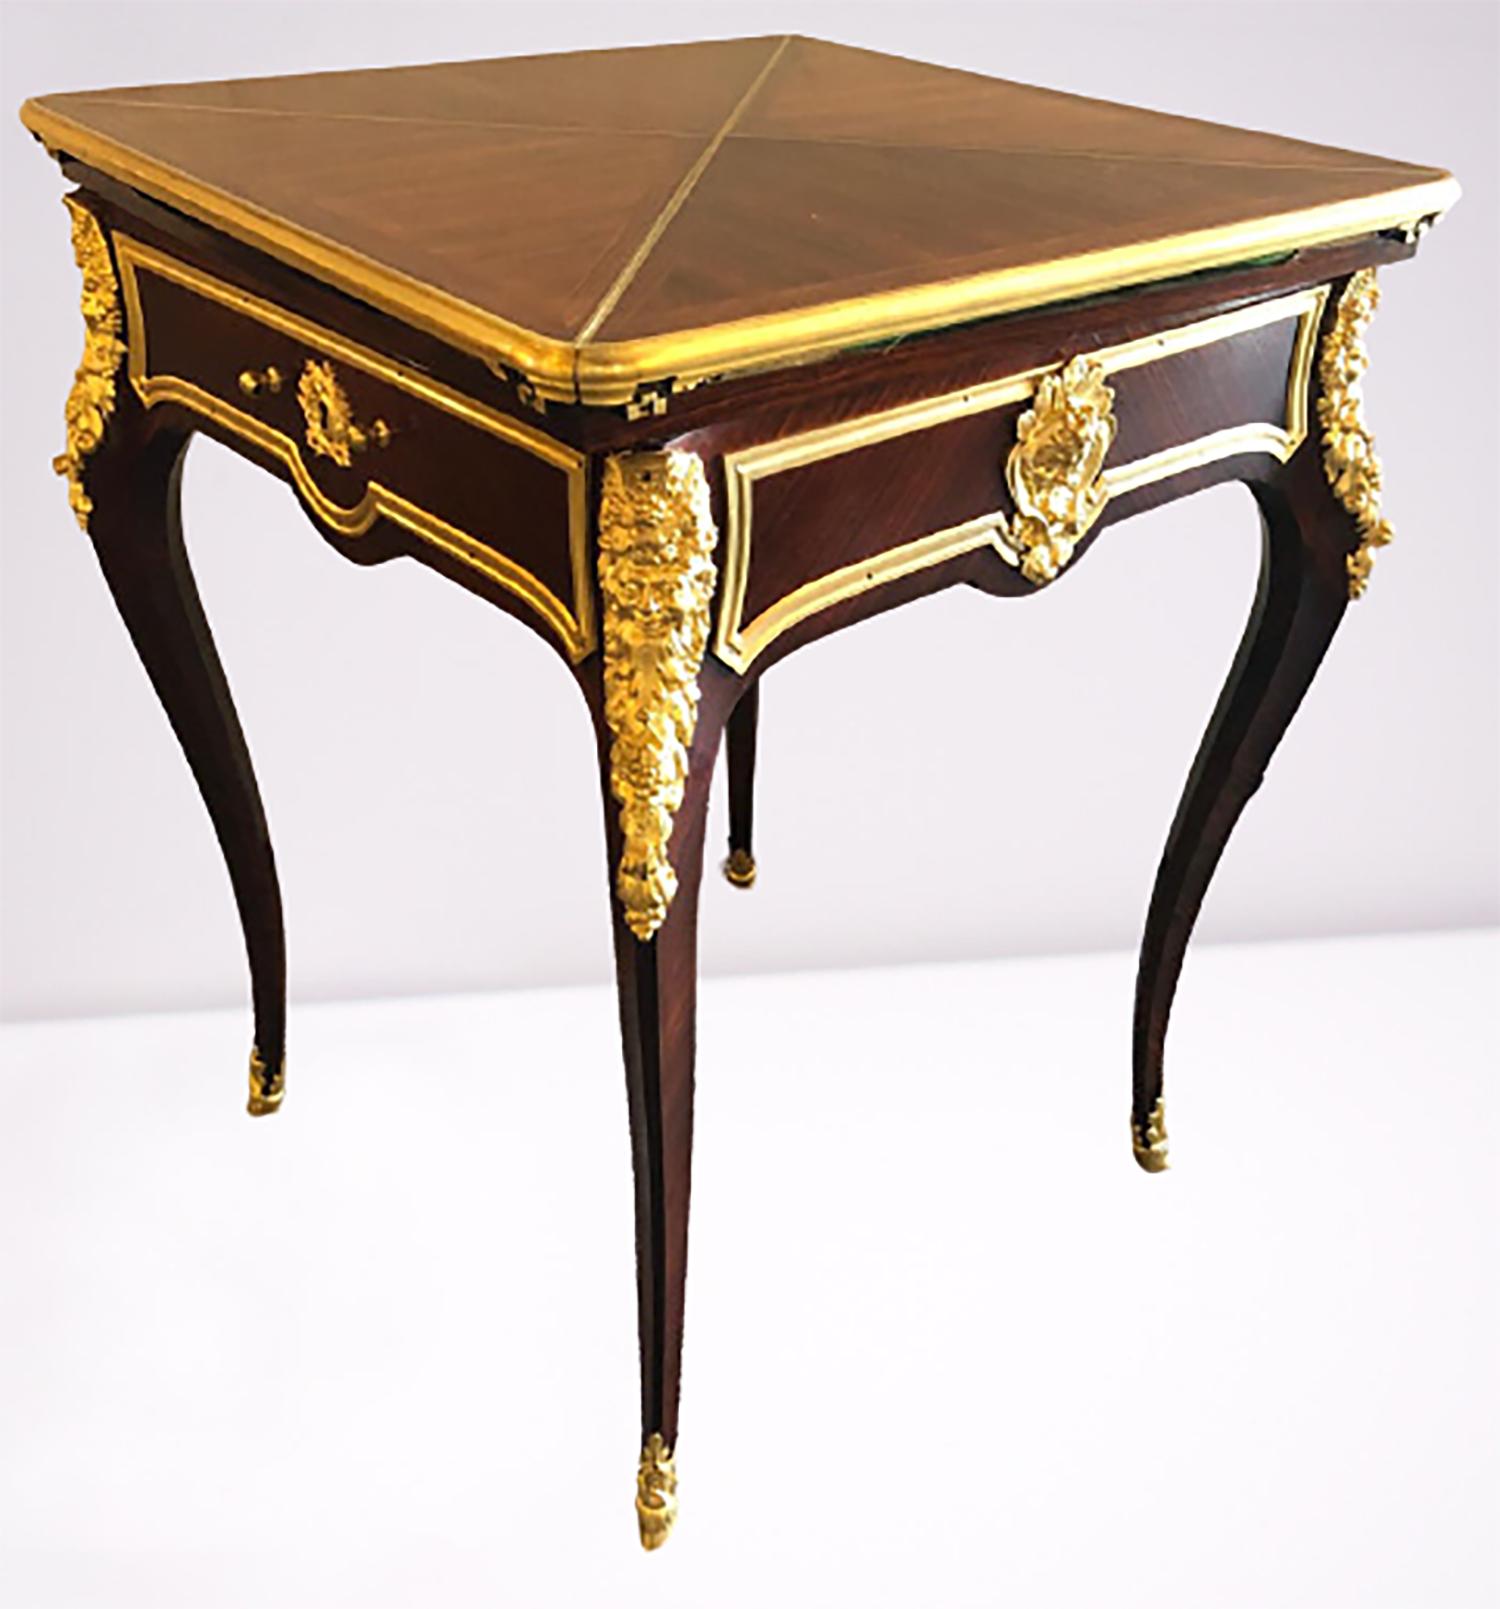 A fine french ormolu-mounted kingwood envelope card table by Paul Sormani. Late 19th century. The revolving fold out top enclosing a gilt tooled baize lined interior above a frieze drawer with a lock stamped Made by P Sormani Pairs, For Geo A